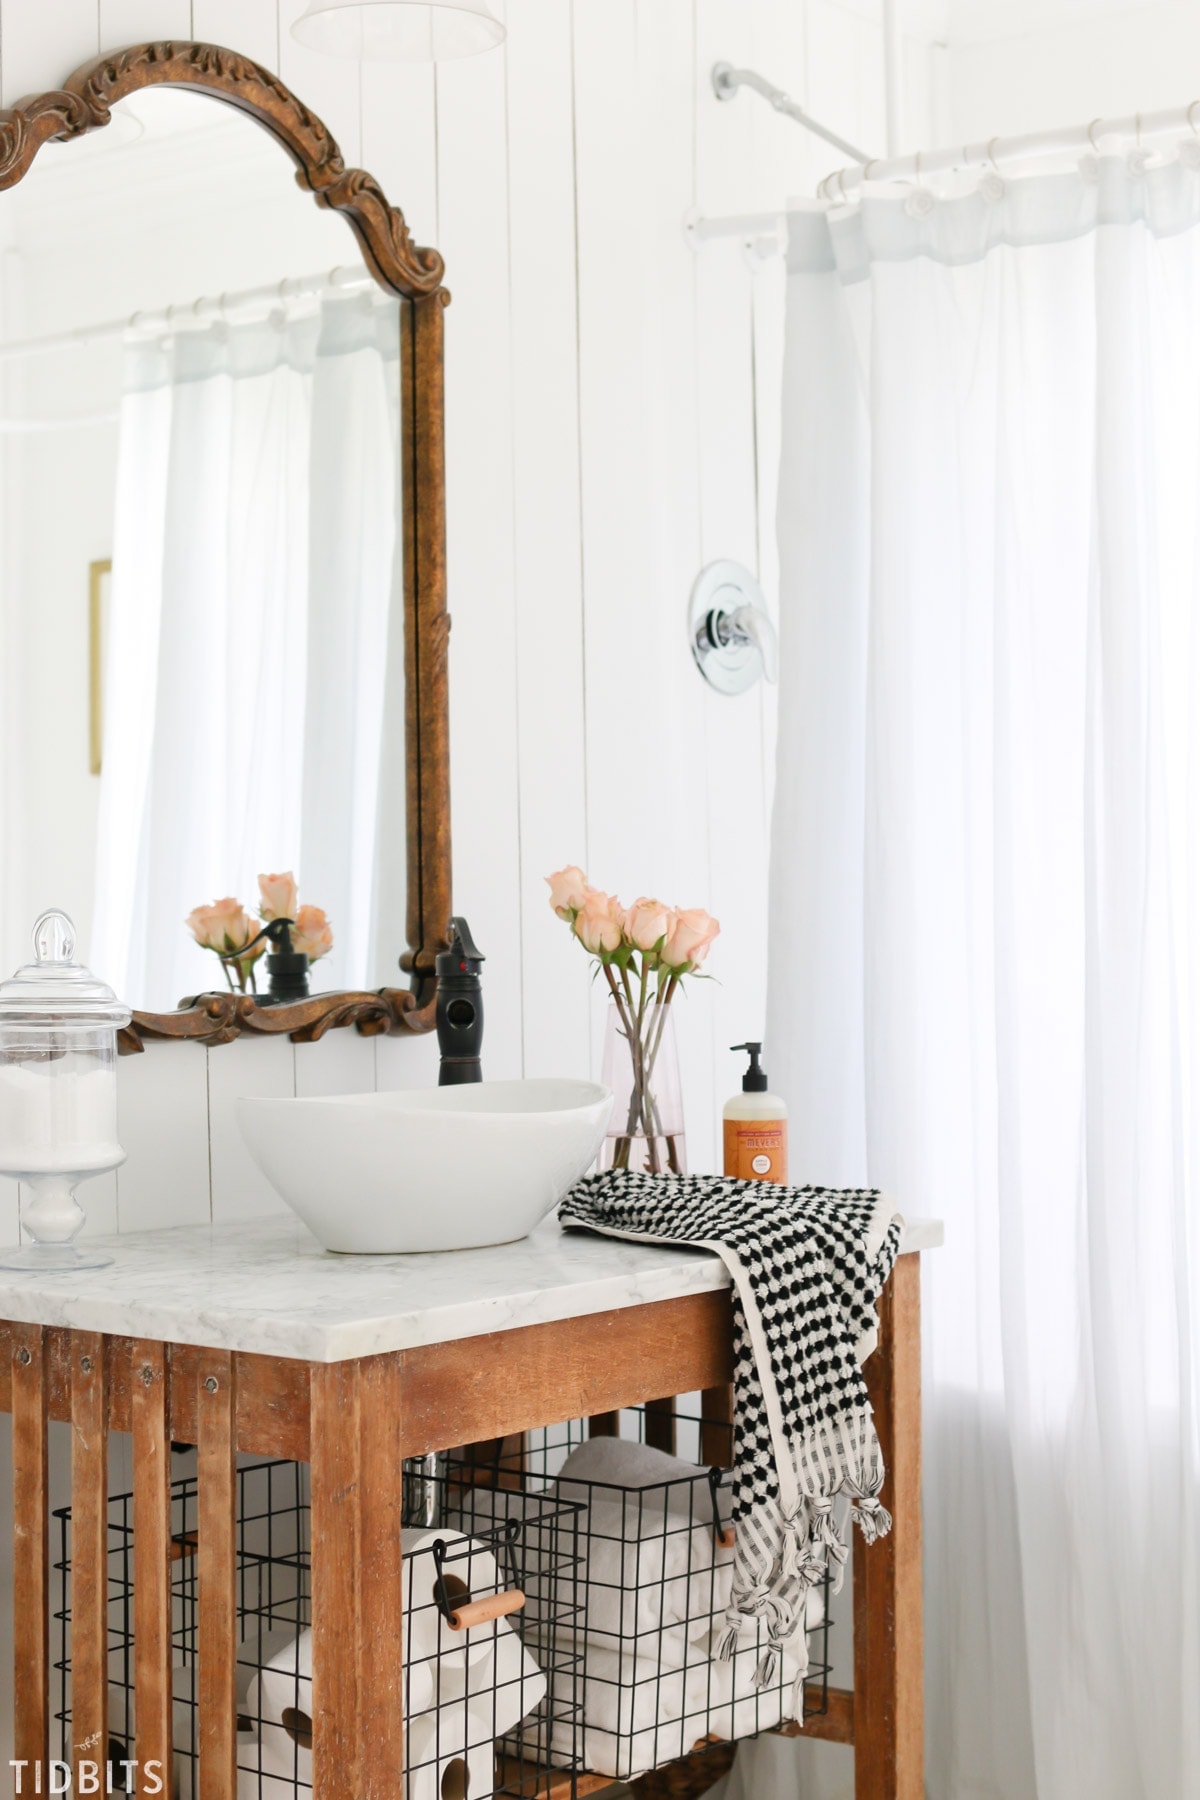 TIDBITS Fall Home Tour | Subtle changes in the Bathroom